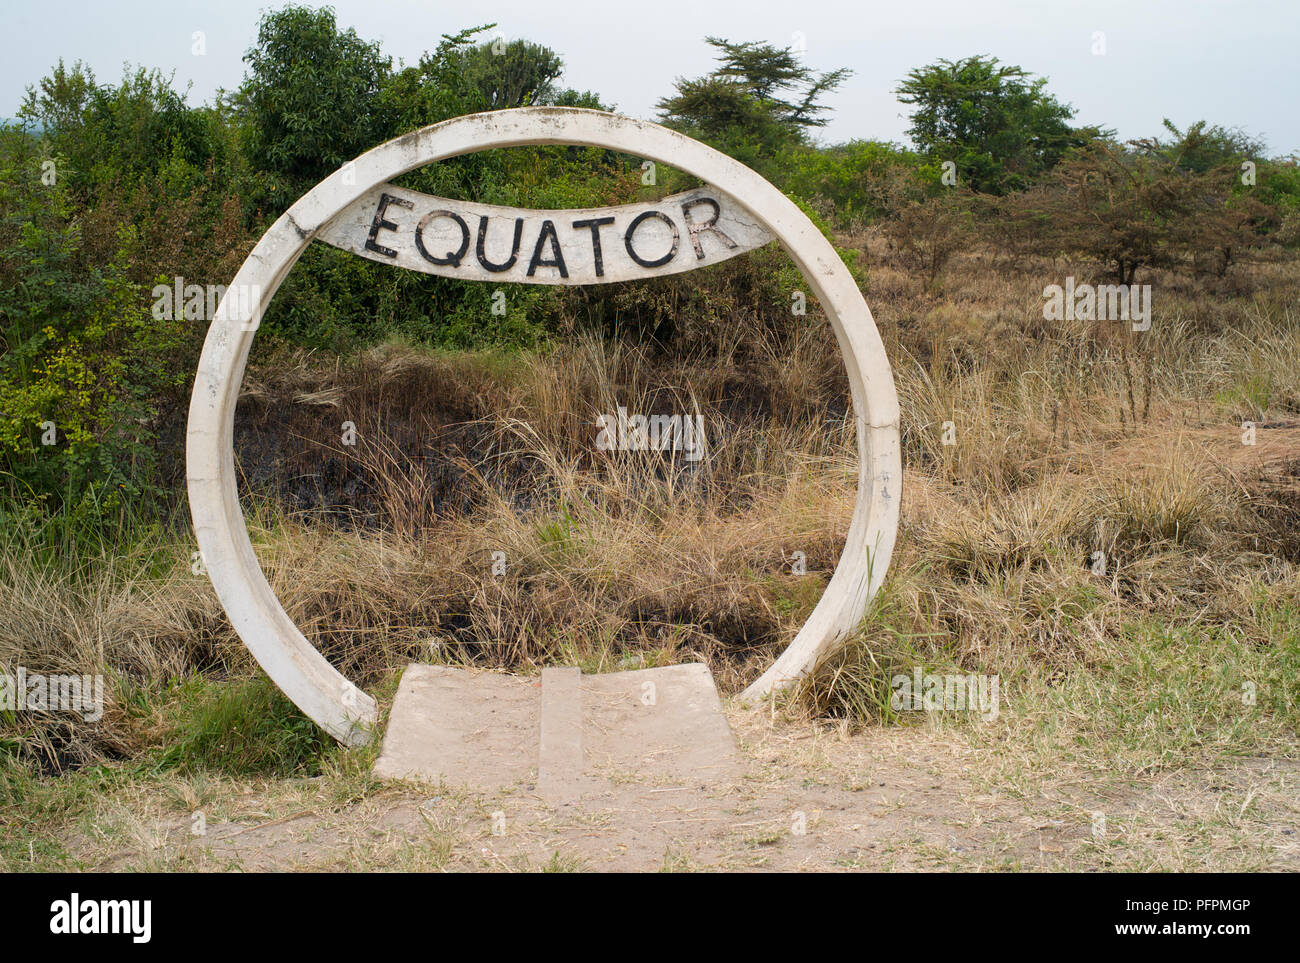 Equator sign in Uganda - A Monument Marking the Line between Northern and Southern Hemisphere Stock Photo